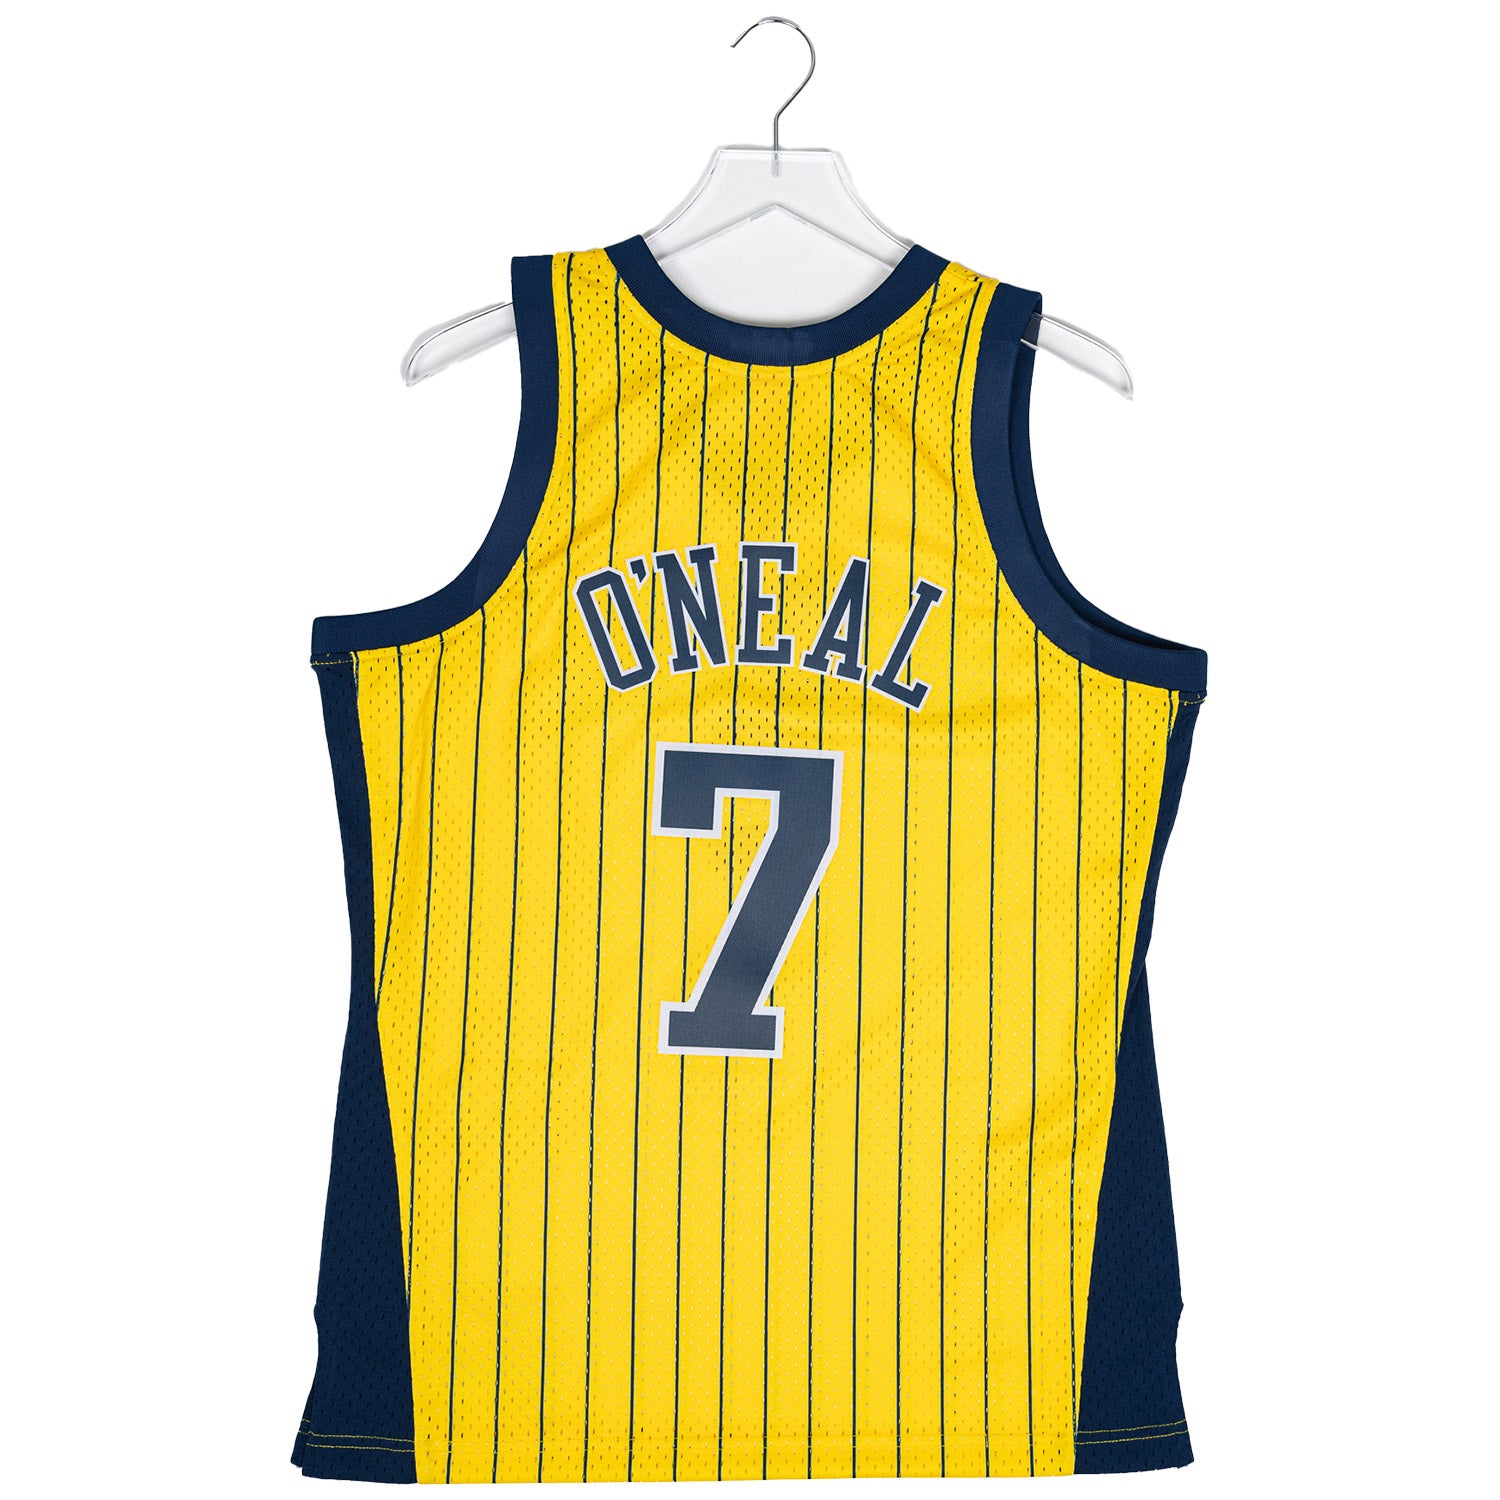 Pacers women's jersey